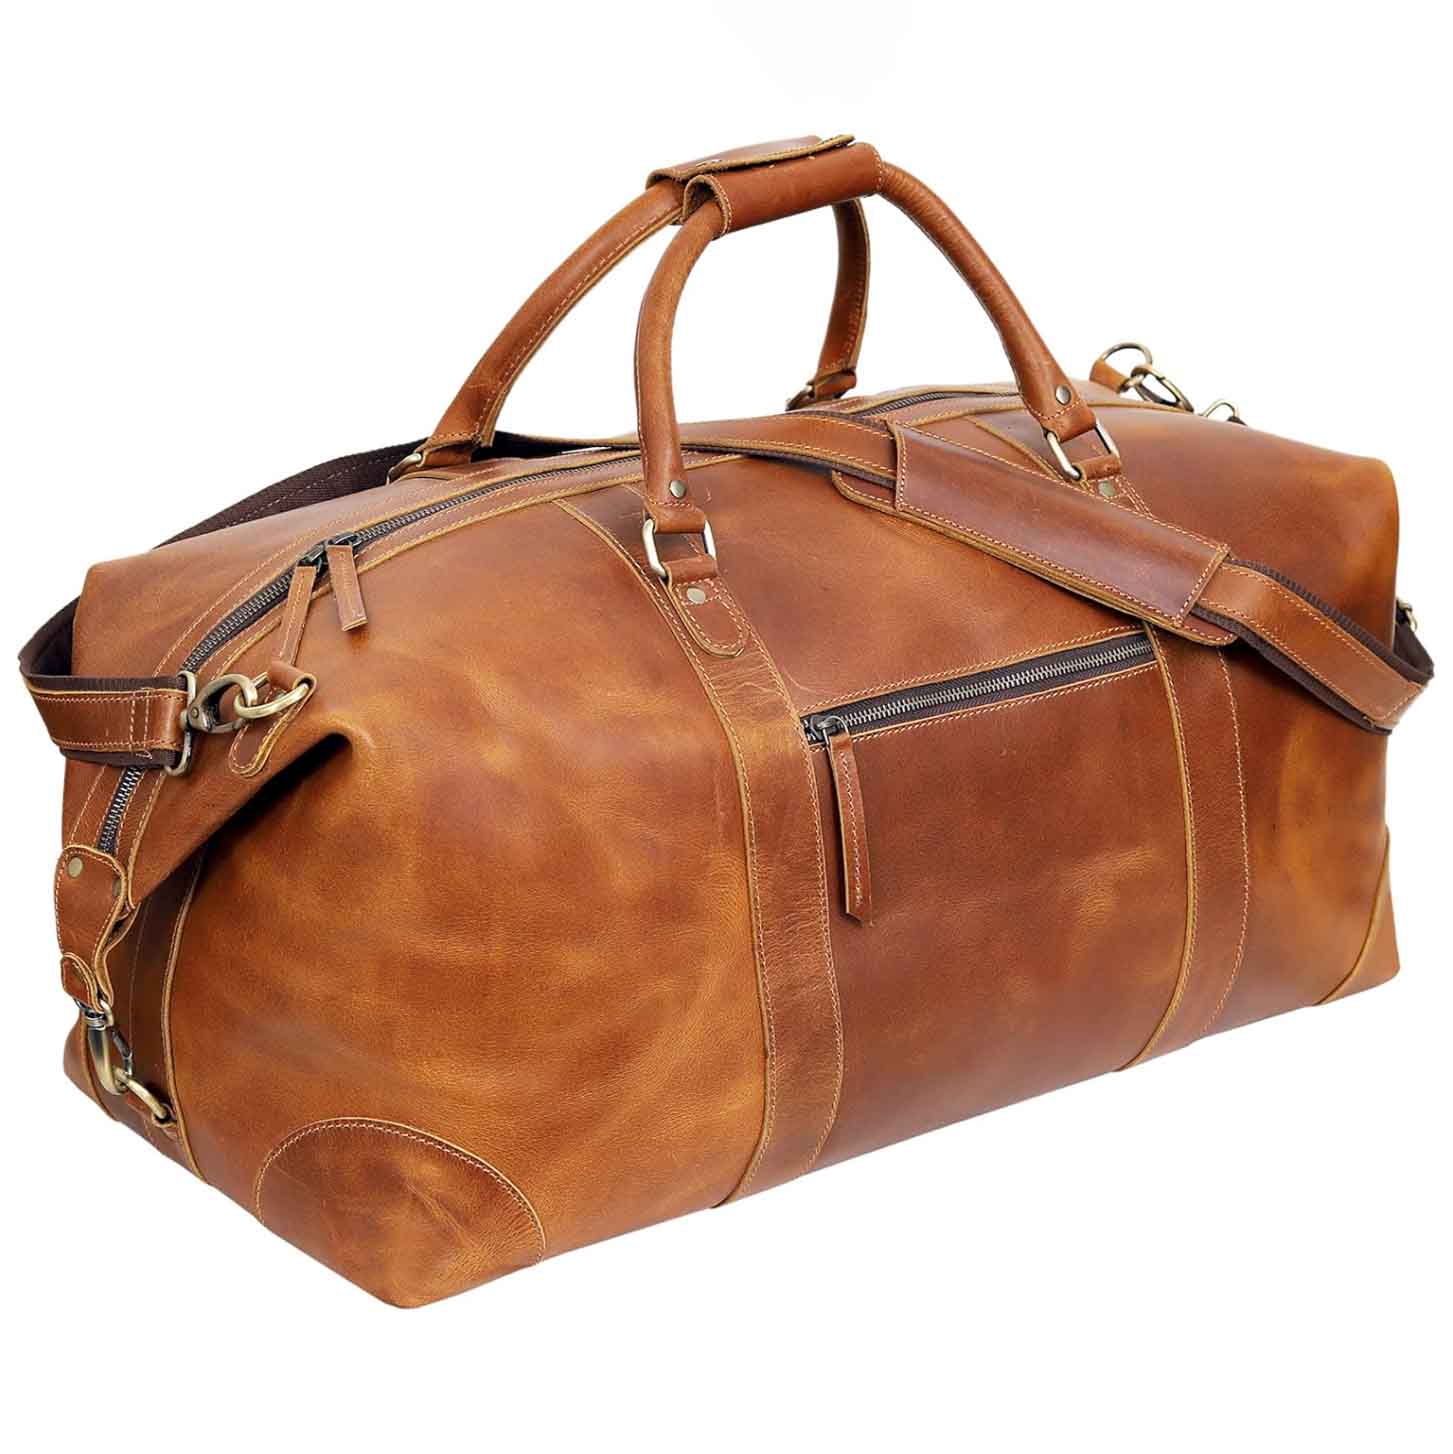 Light brown leather duffle bag